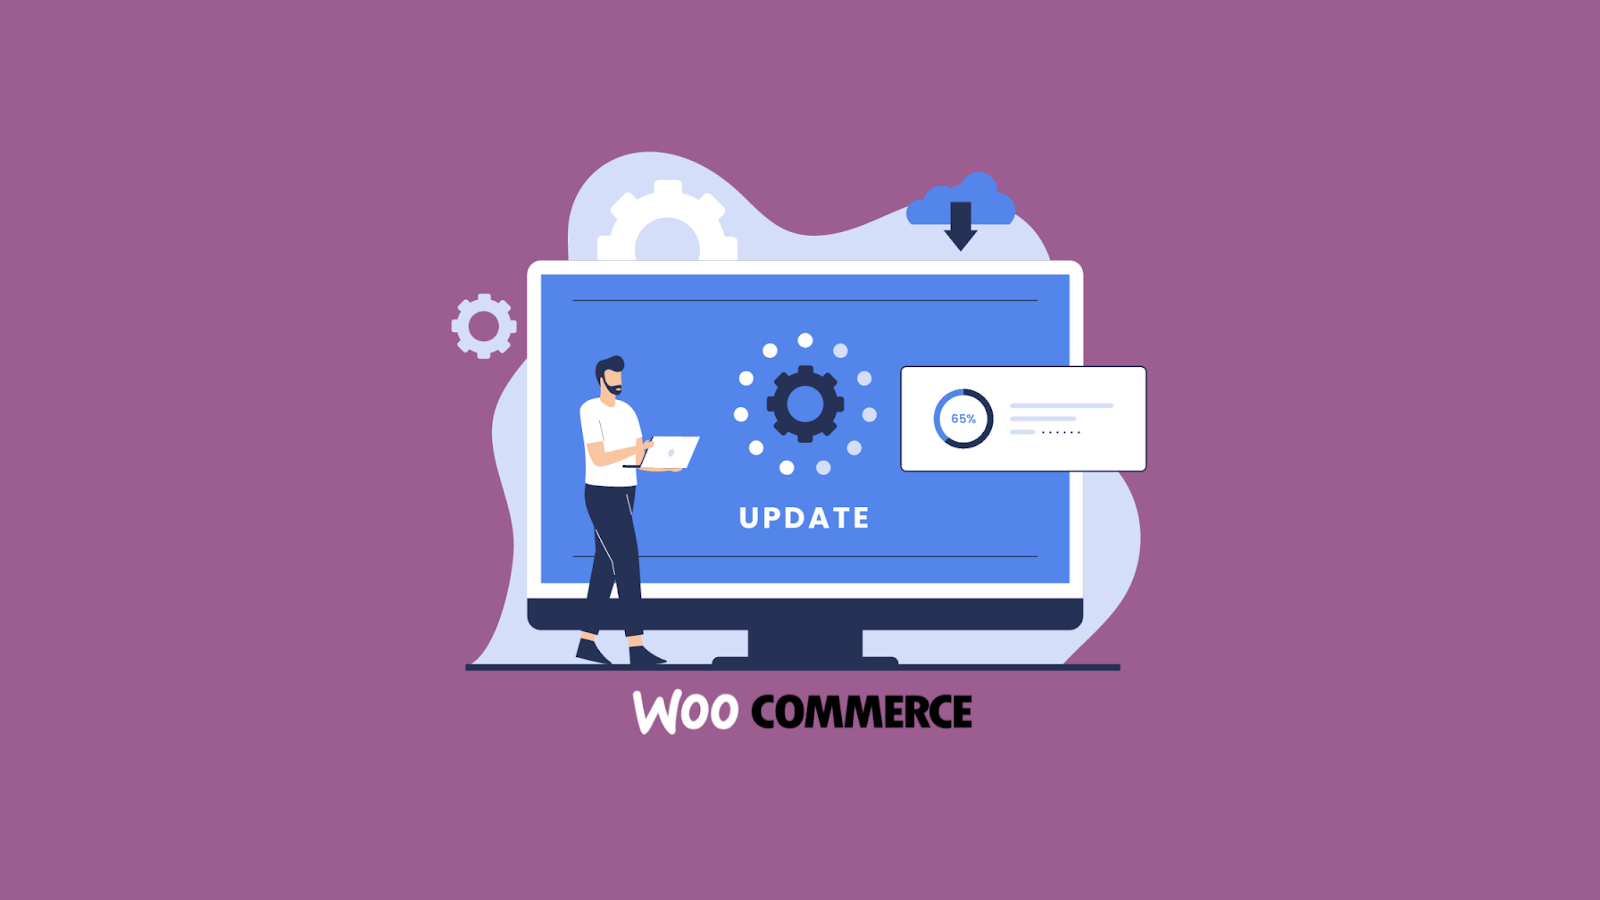 Understanding the importance of updating WooCommerce